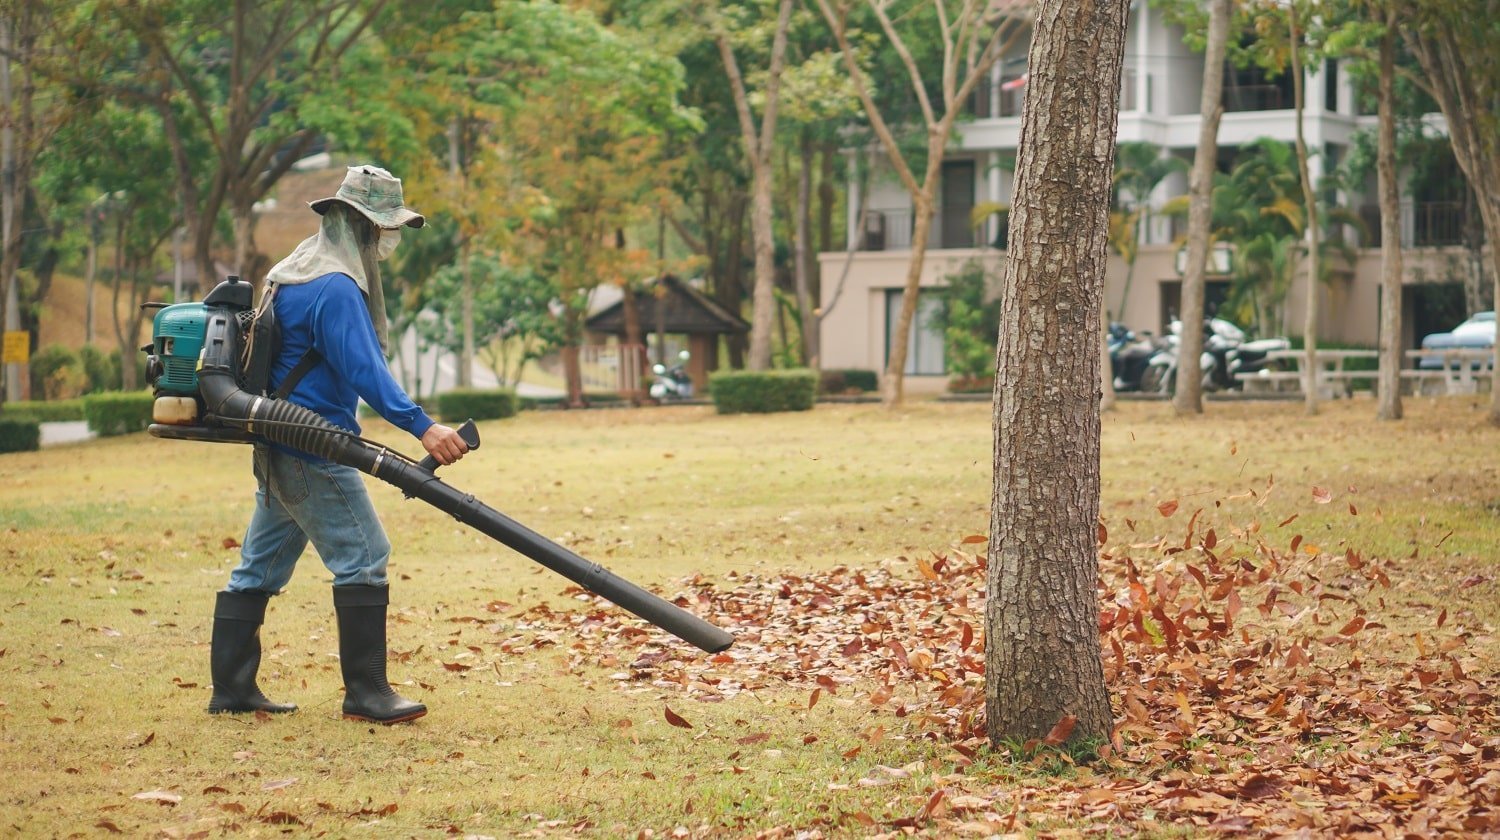 Worker cleans Autumn leaves in the park by blower machine